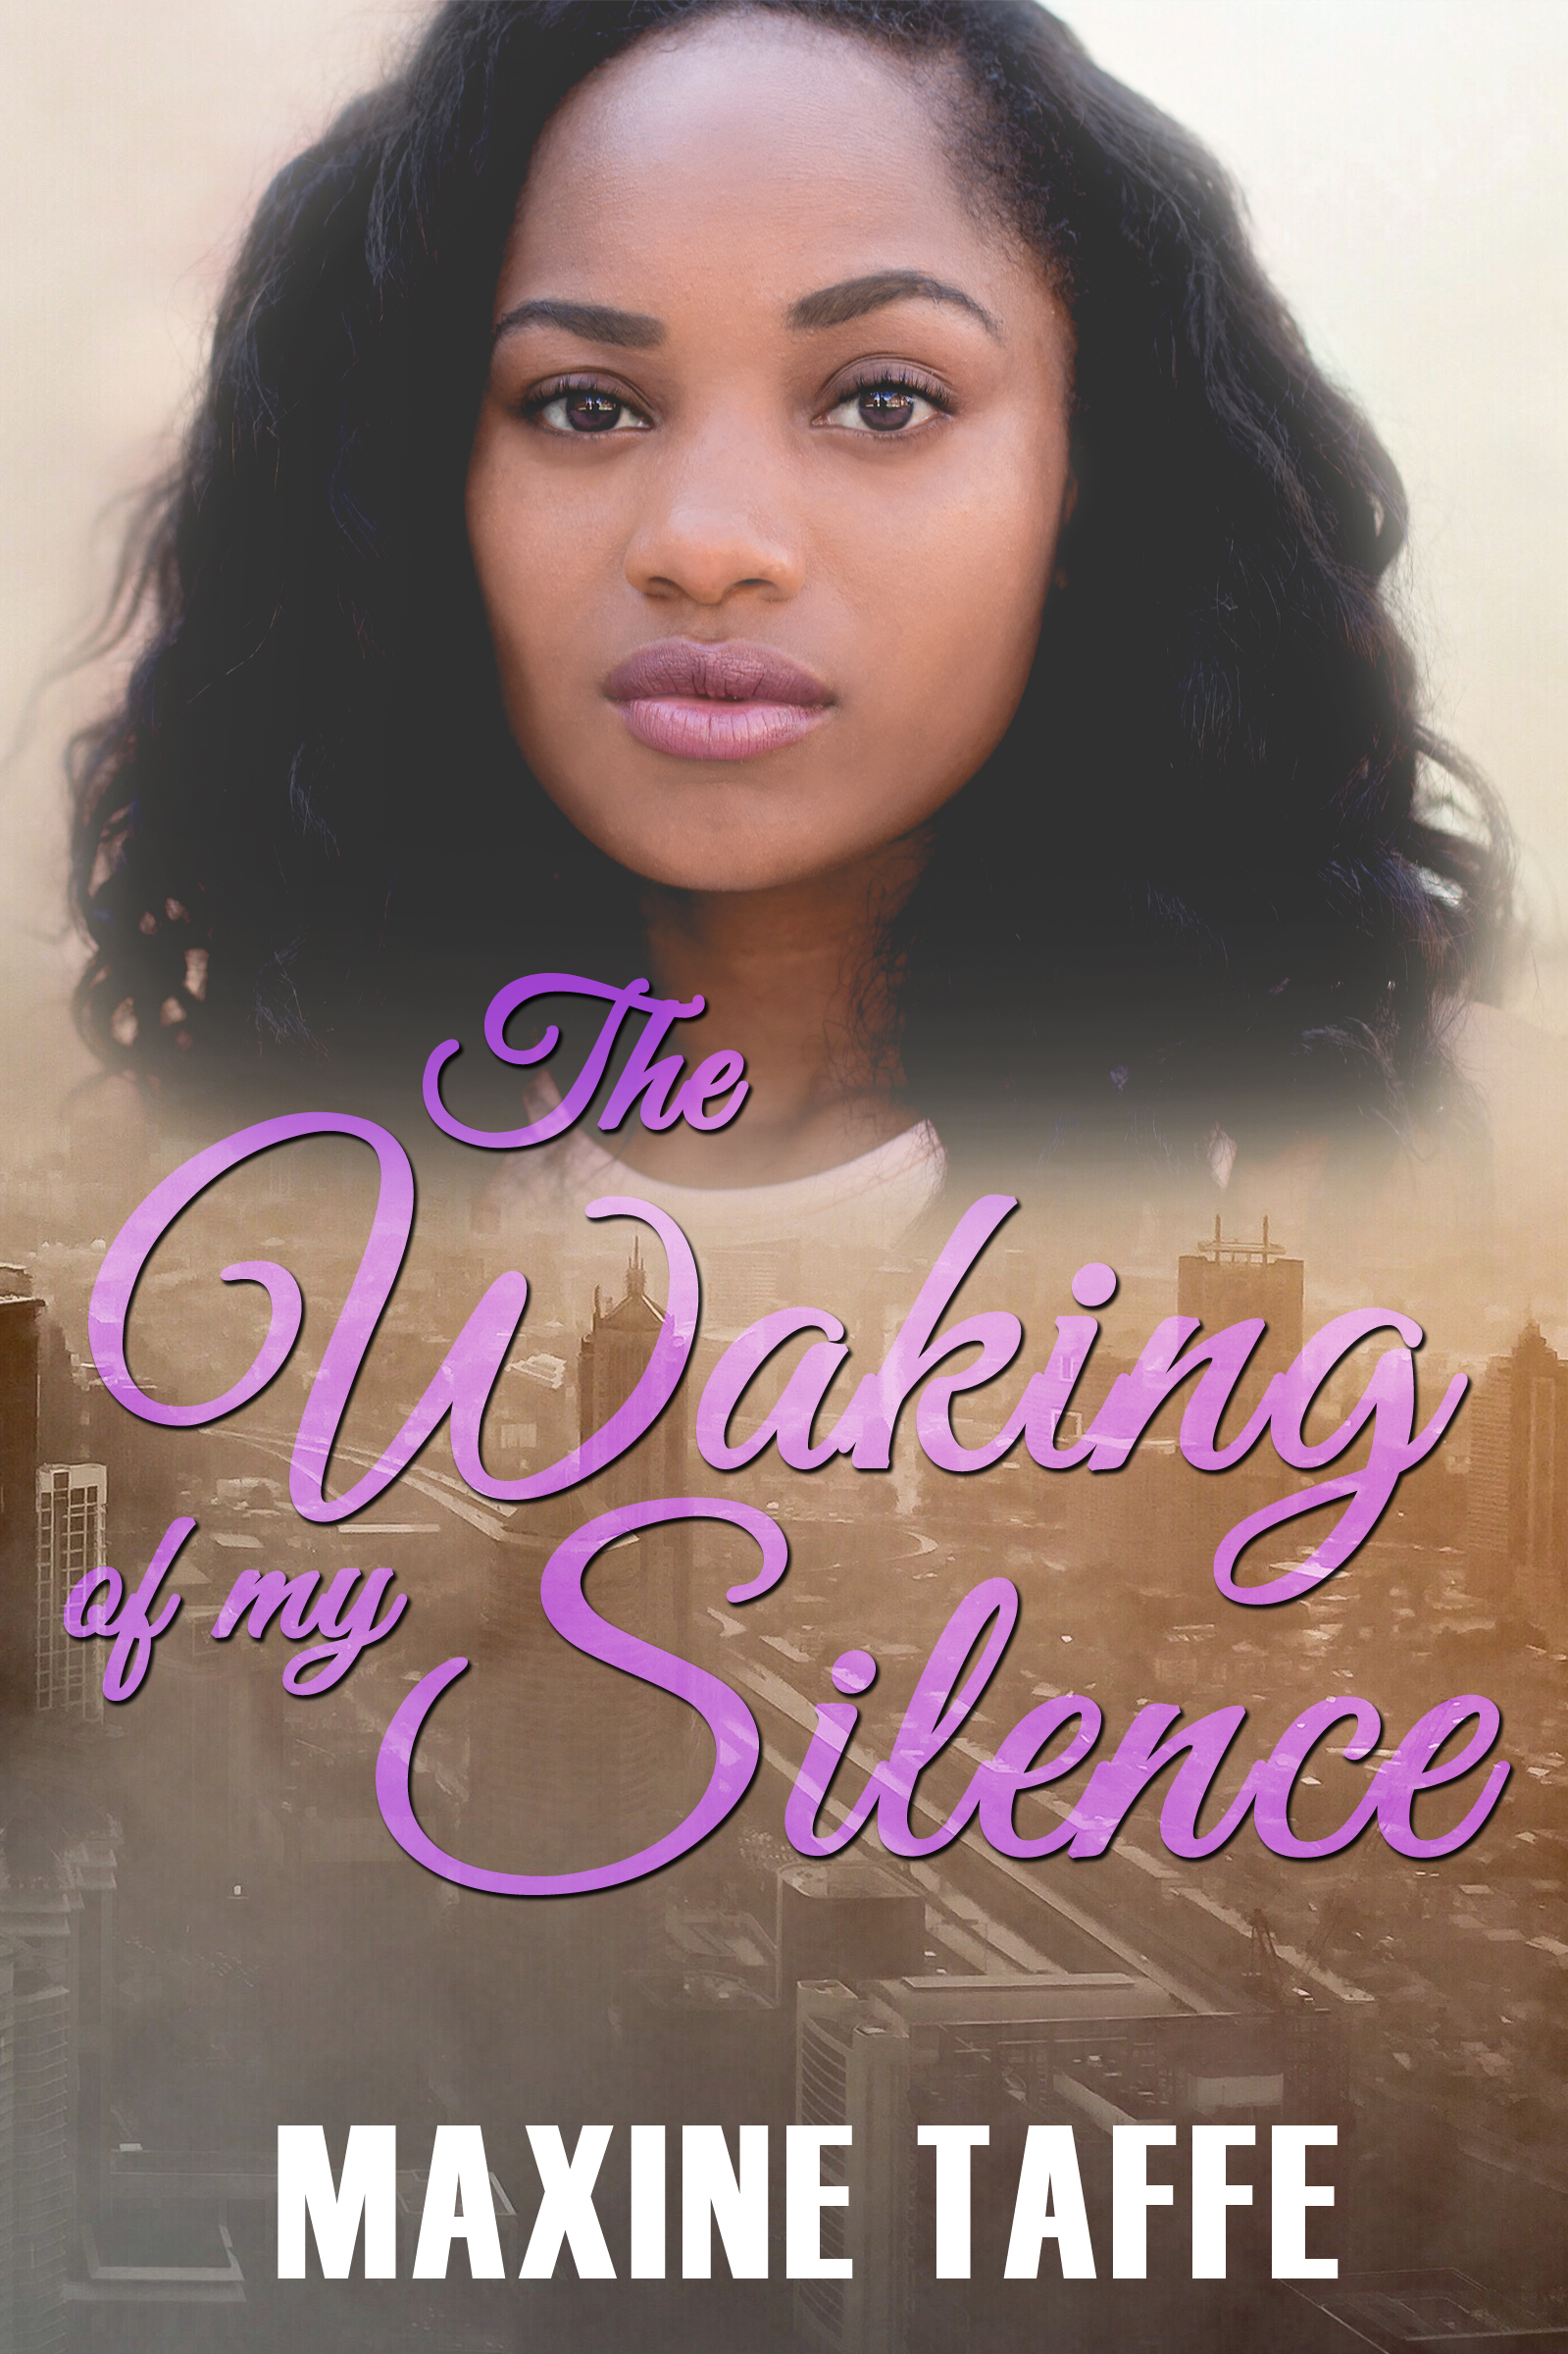 FREE: The Waking Of My Silence by Maxine Bhogal